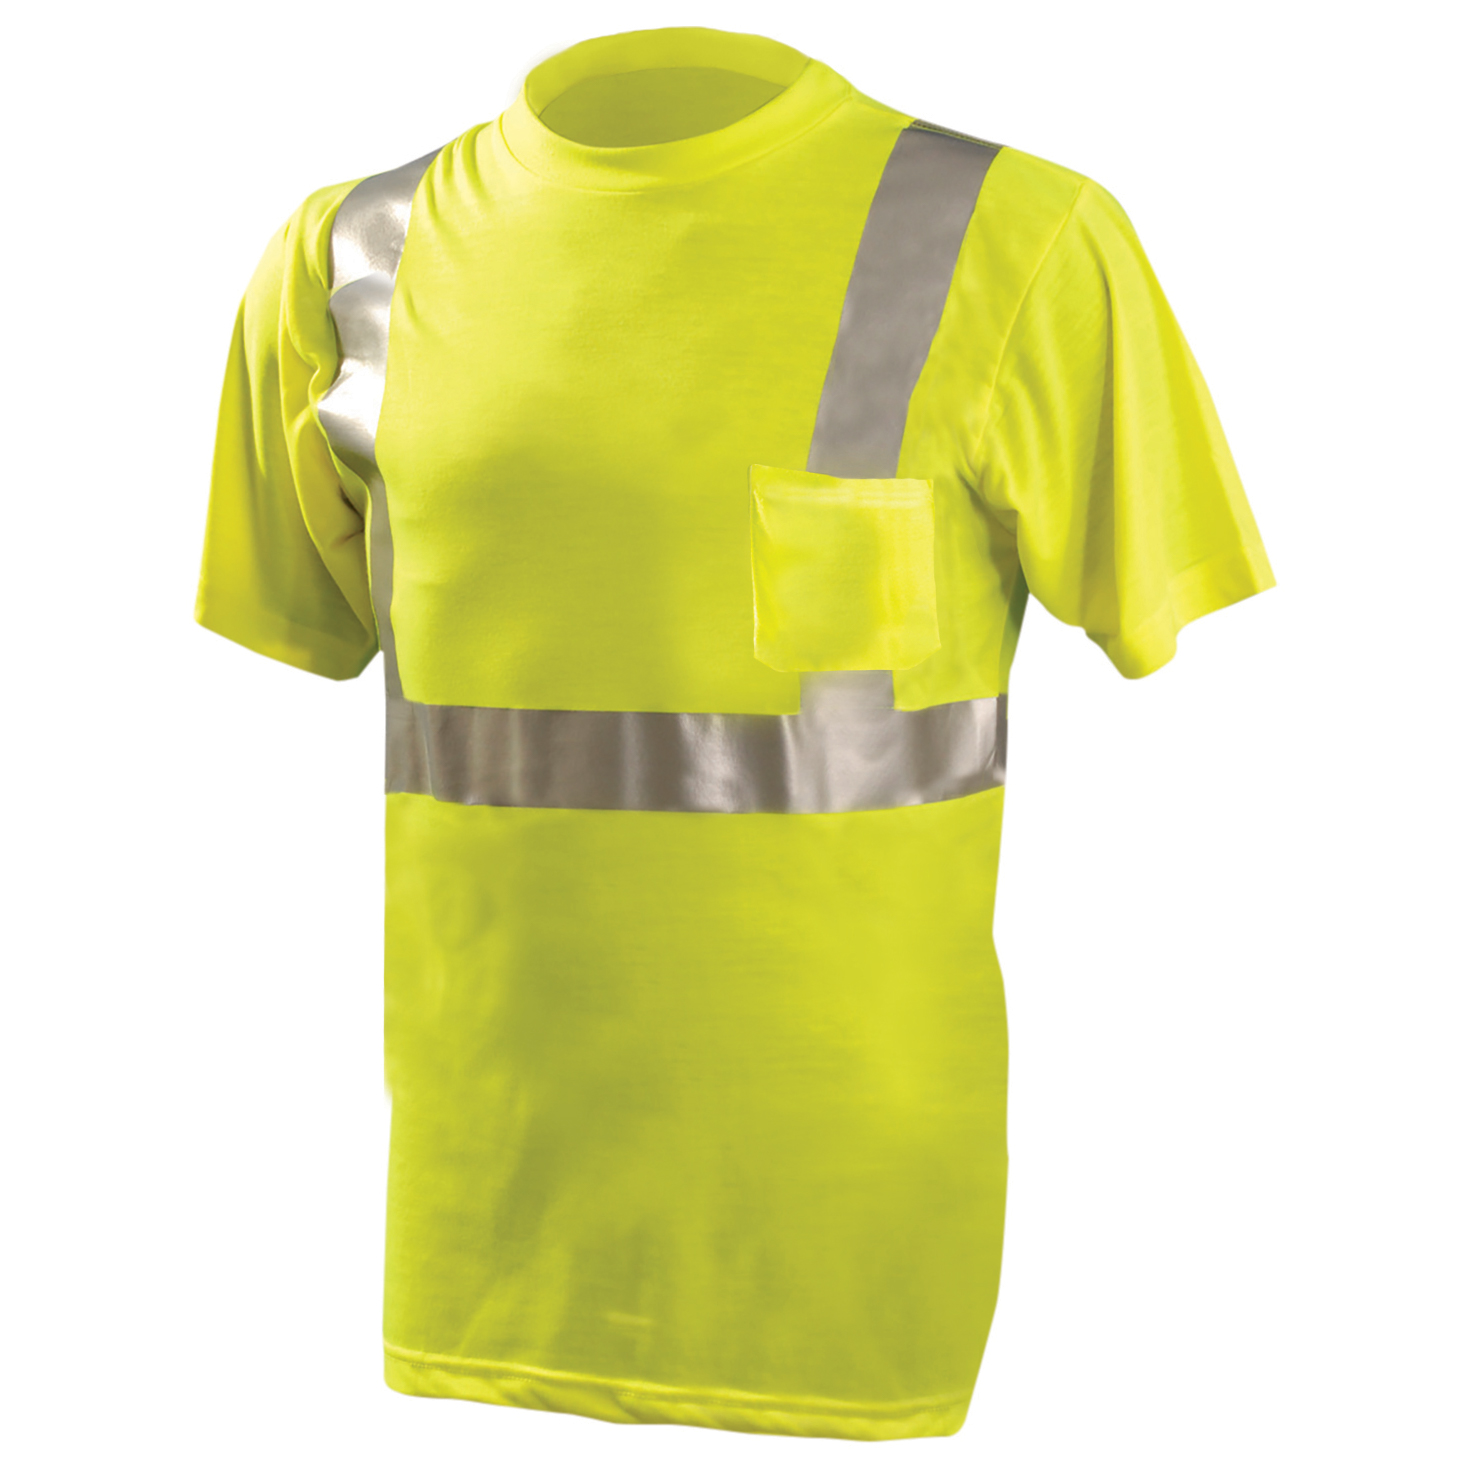 OccuNomix LUX-SSETP2 Type R Class 2 Wicking Safety T-Shirt - Yellow ...